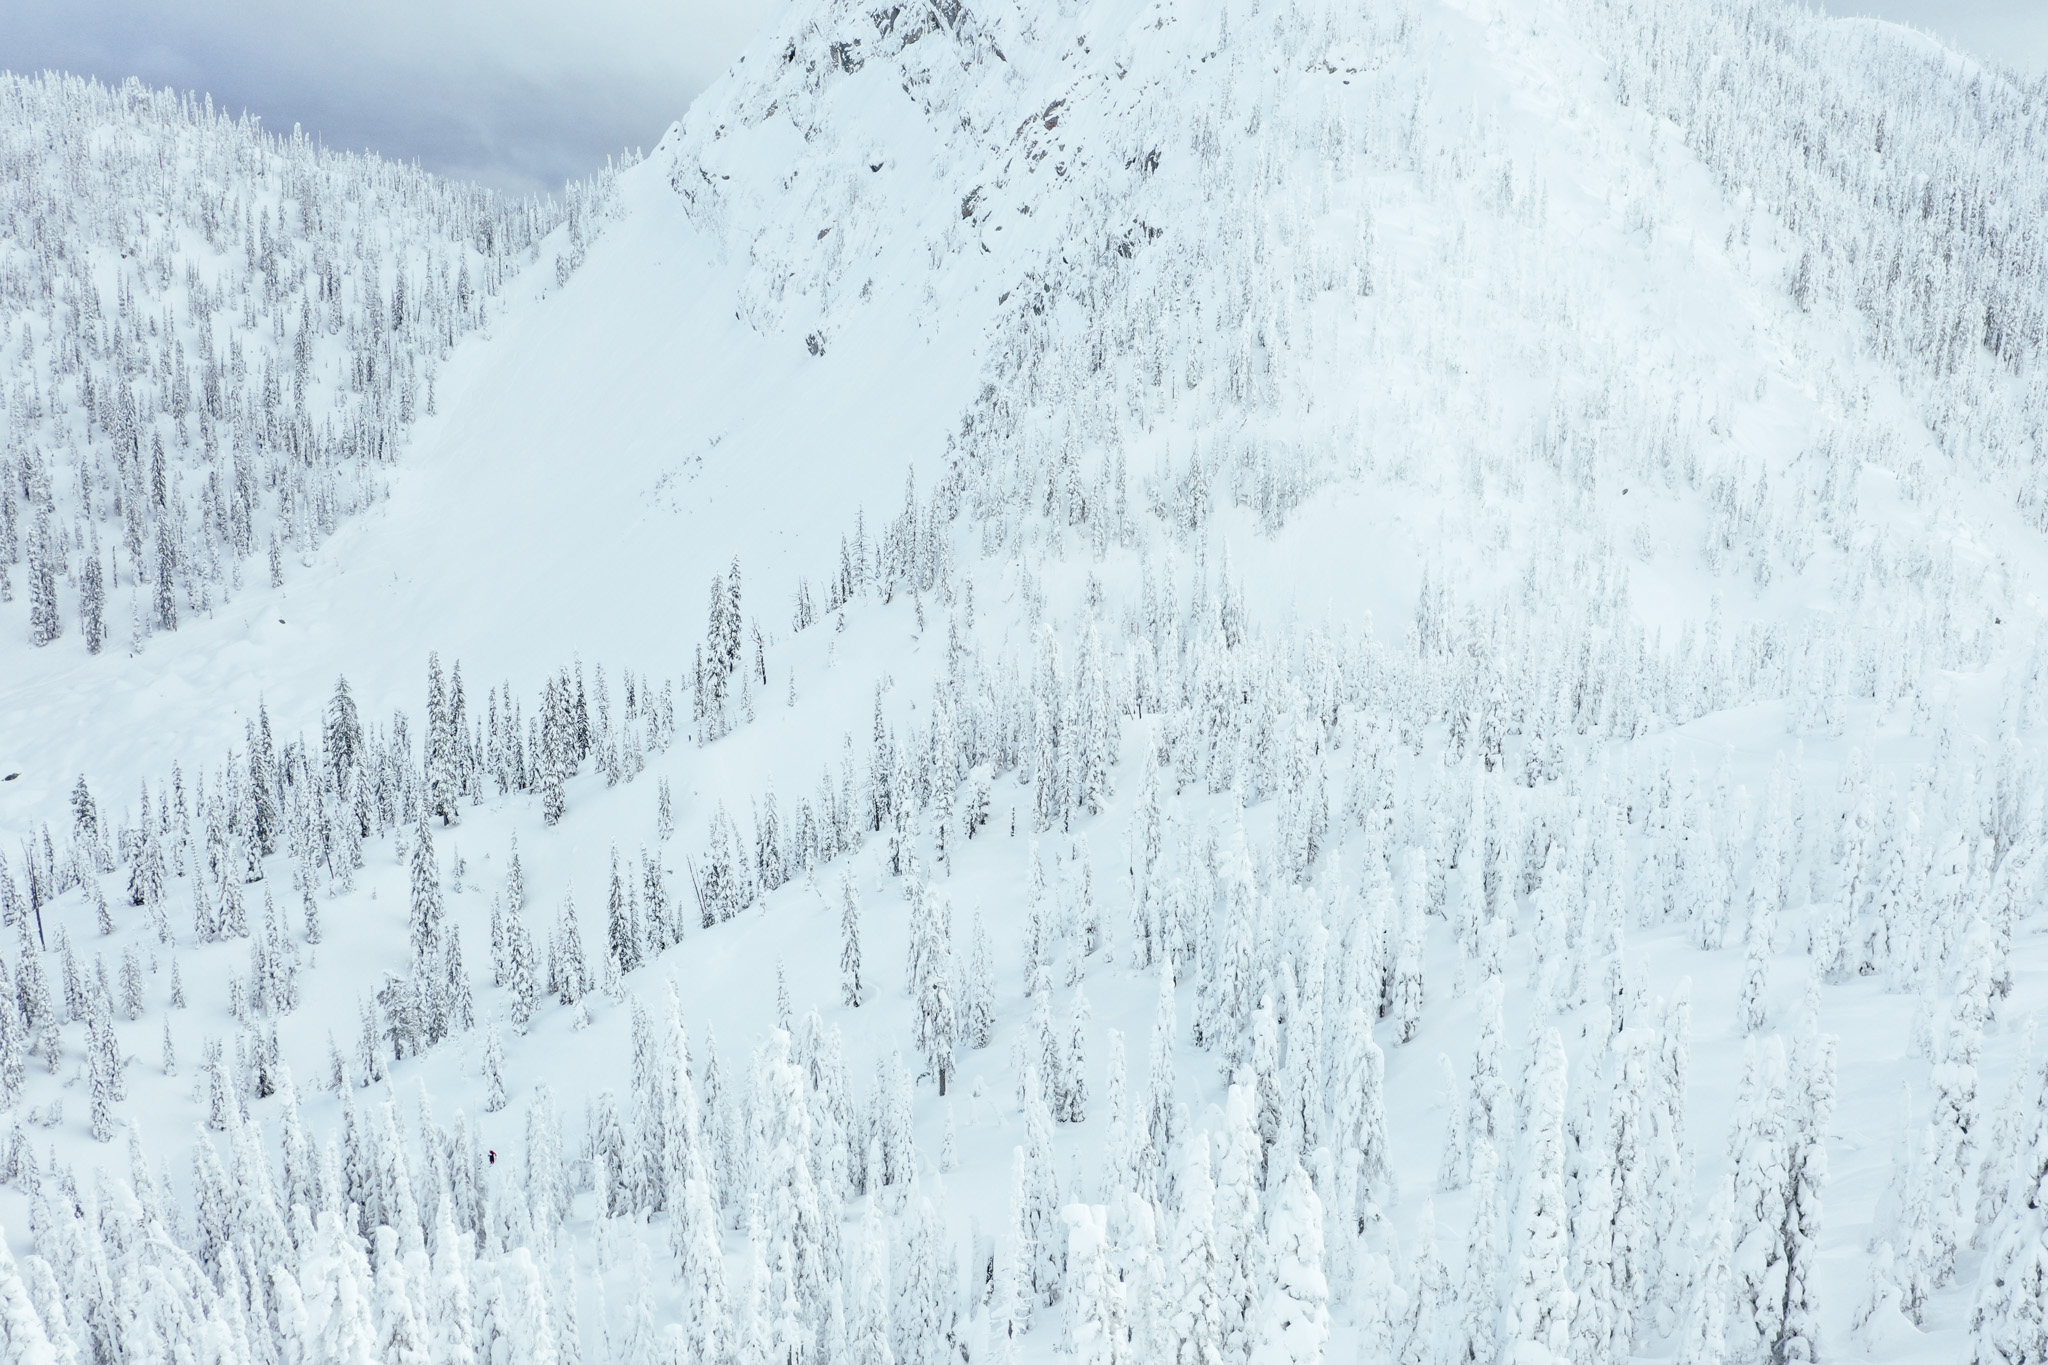 Fernie's famous forests and some of the best weaving tree-riding in Canada